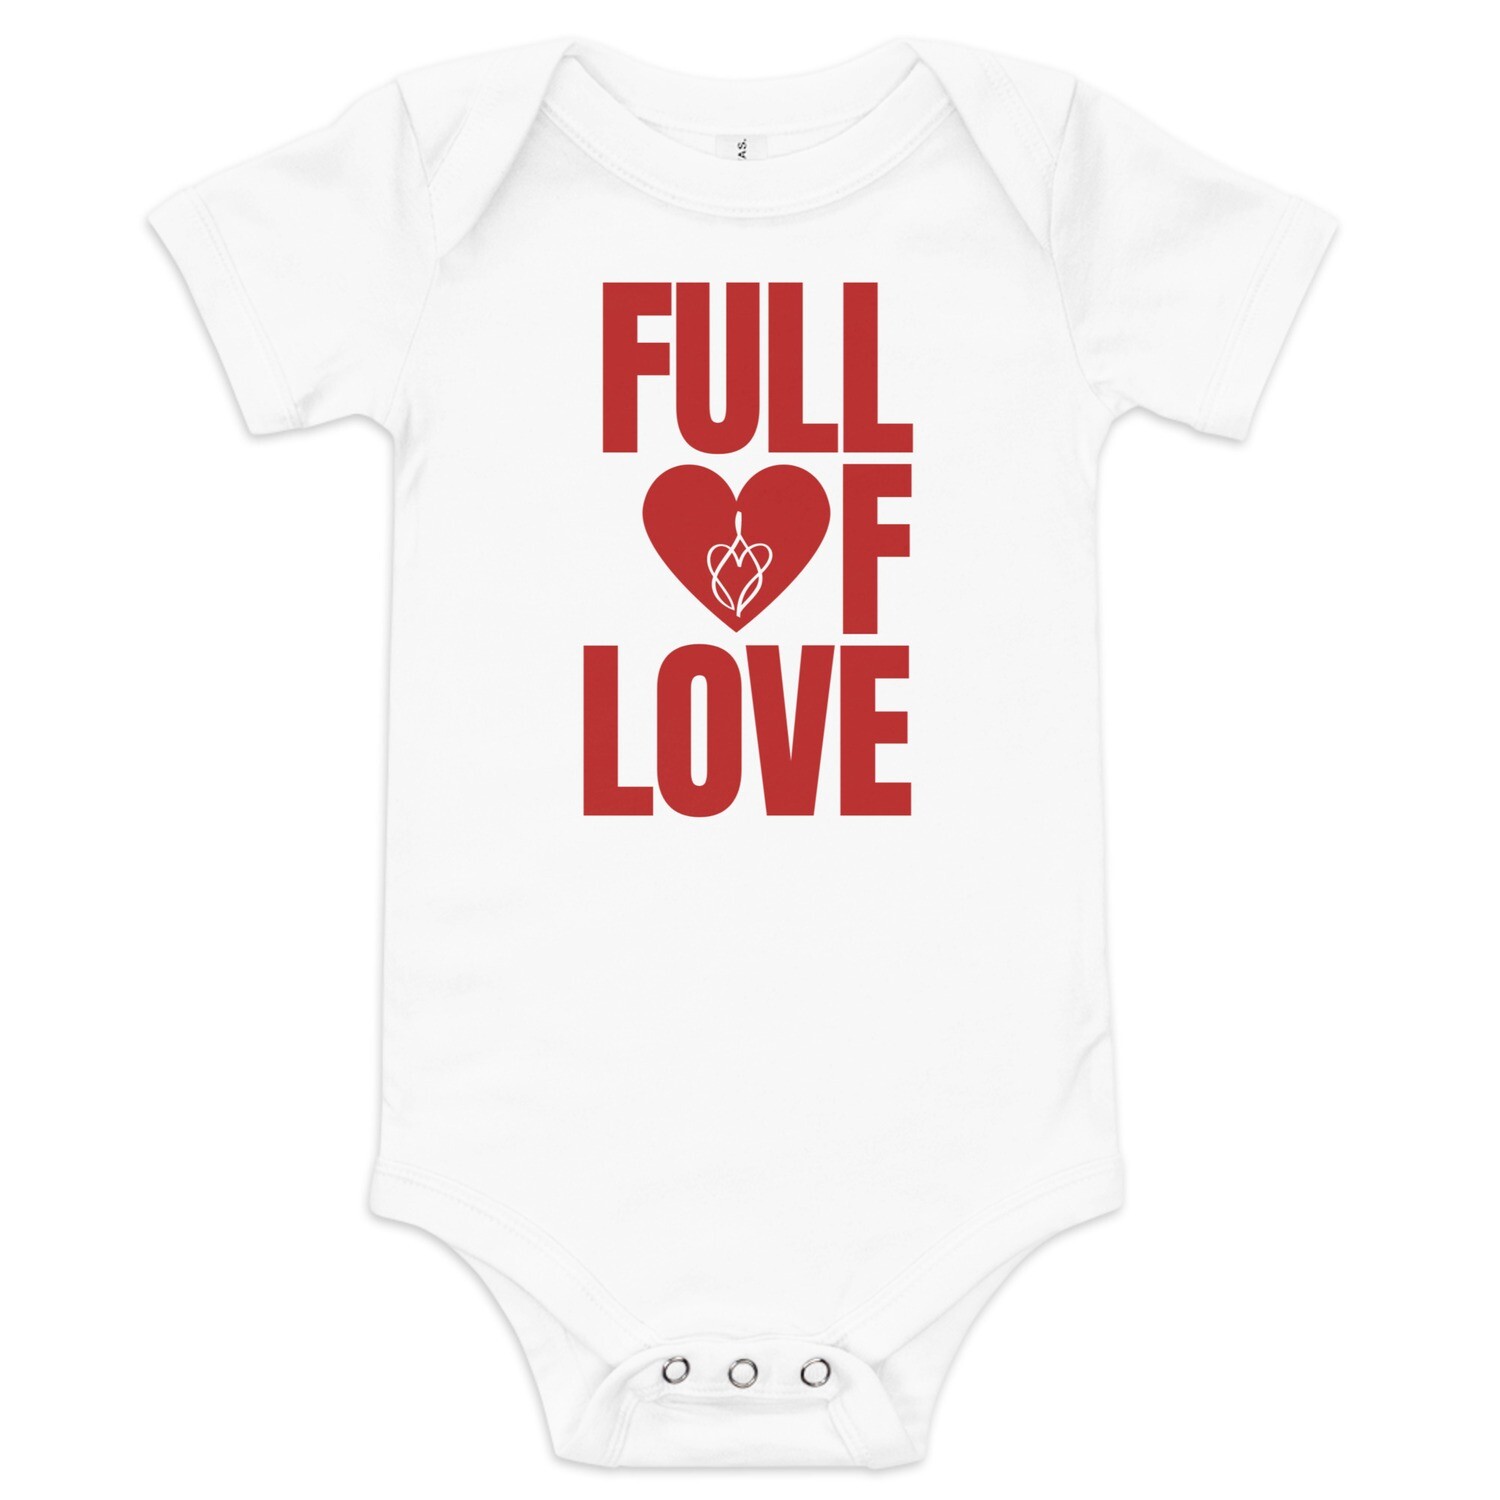 Full of Love - Baby short sleeve one piece